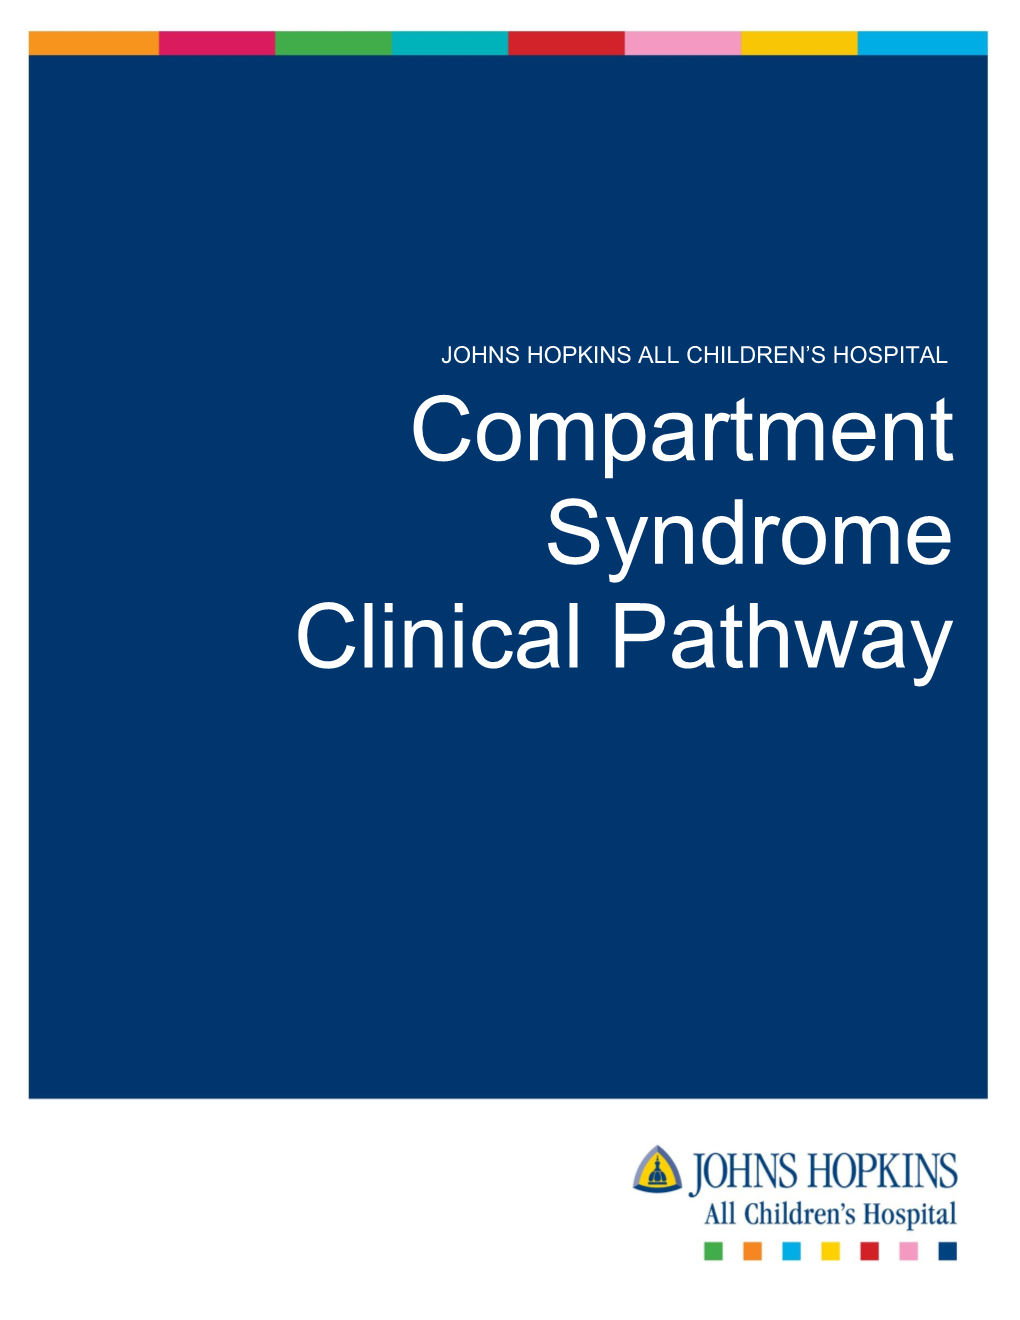 Acute Compartment Syndrome Clinical Pathway 5